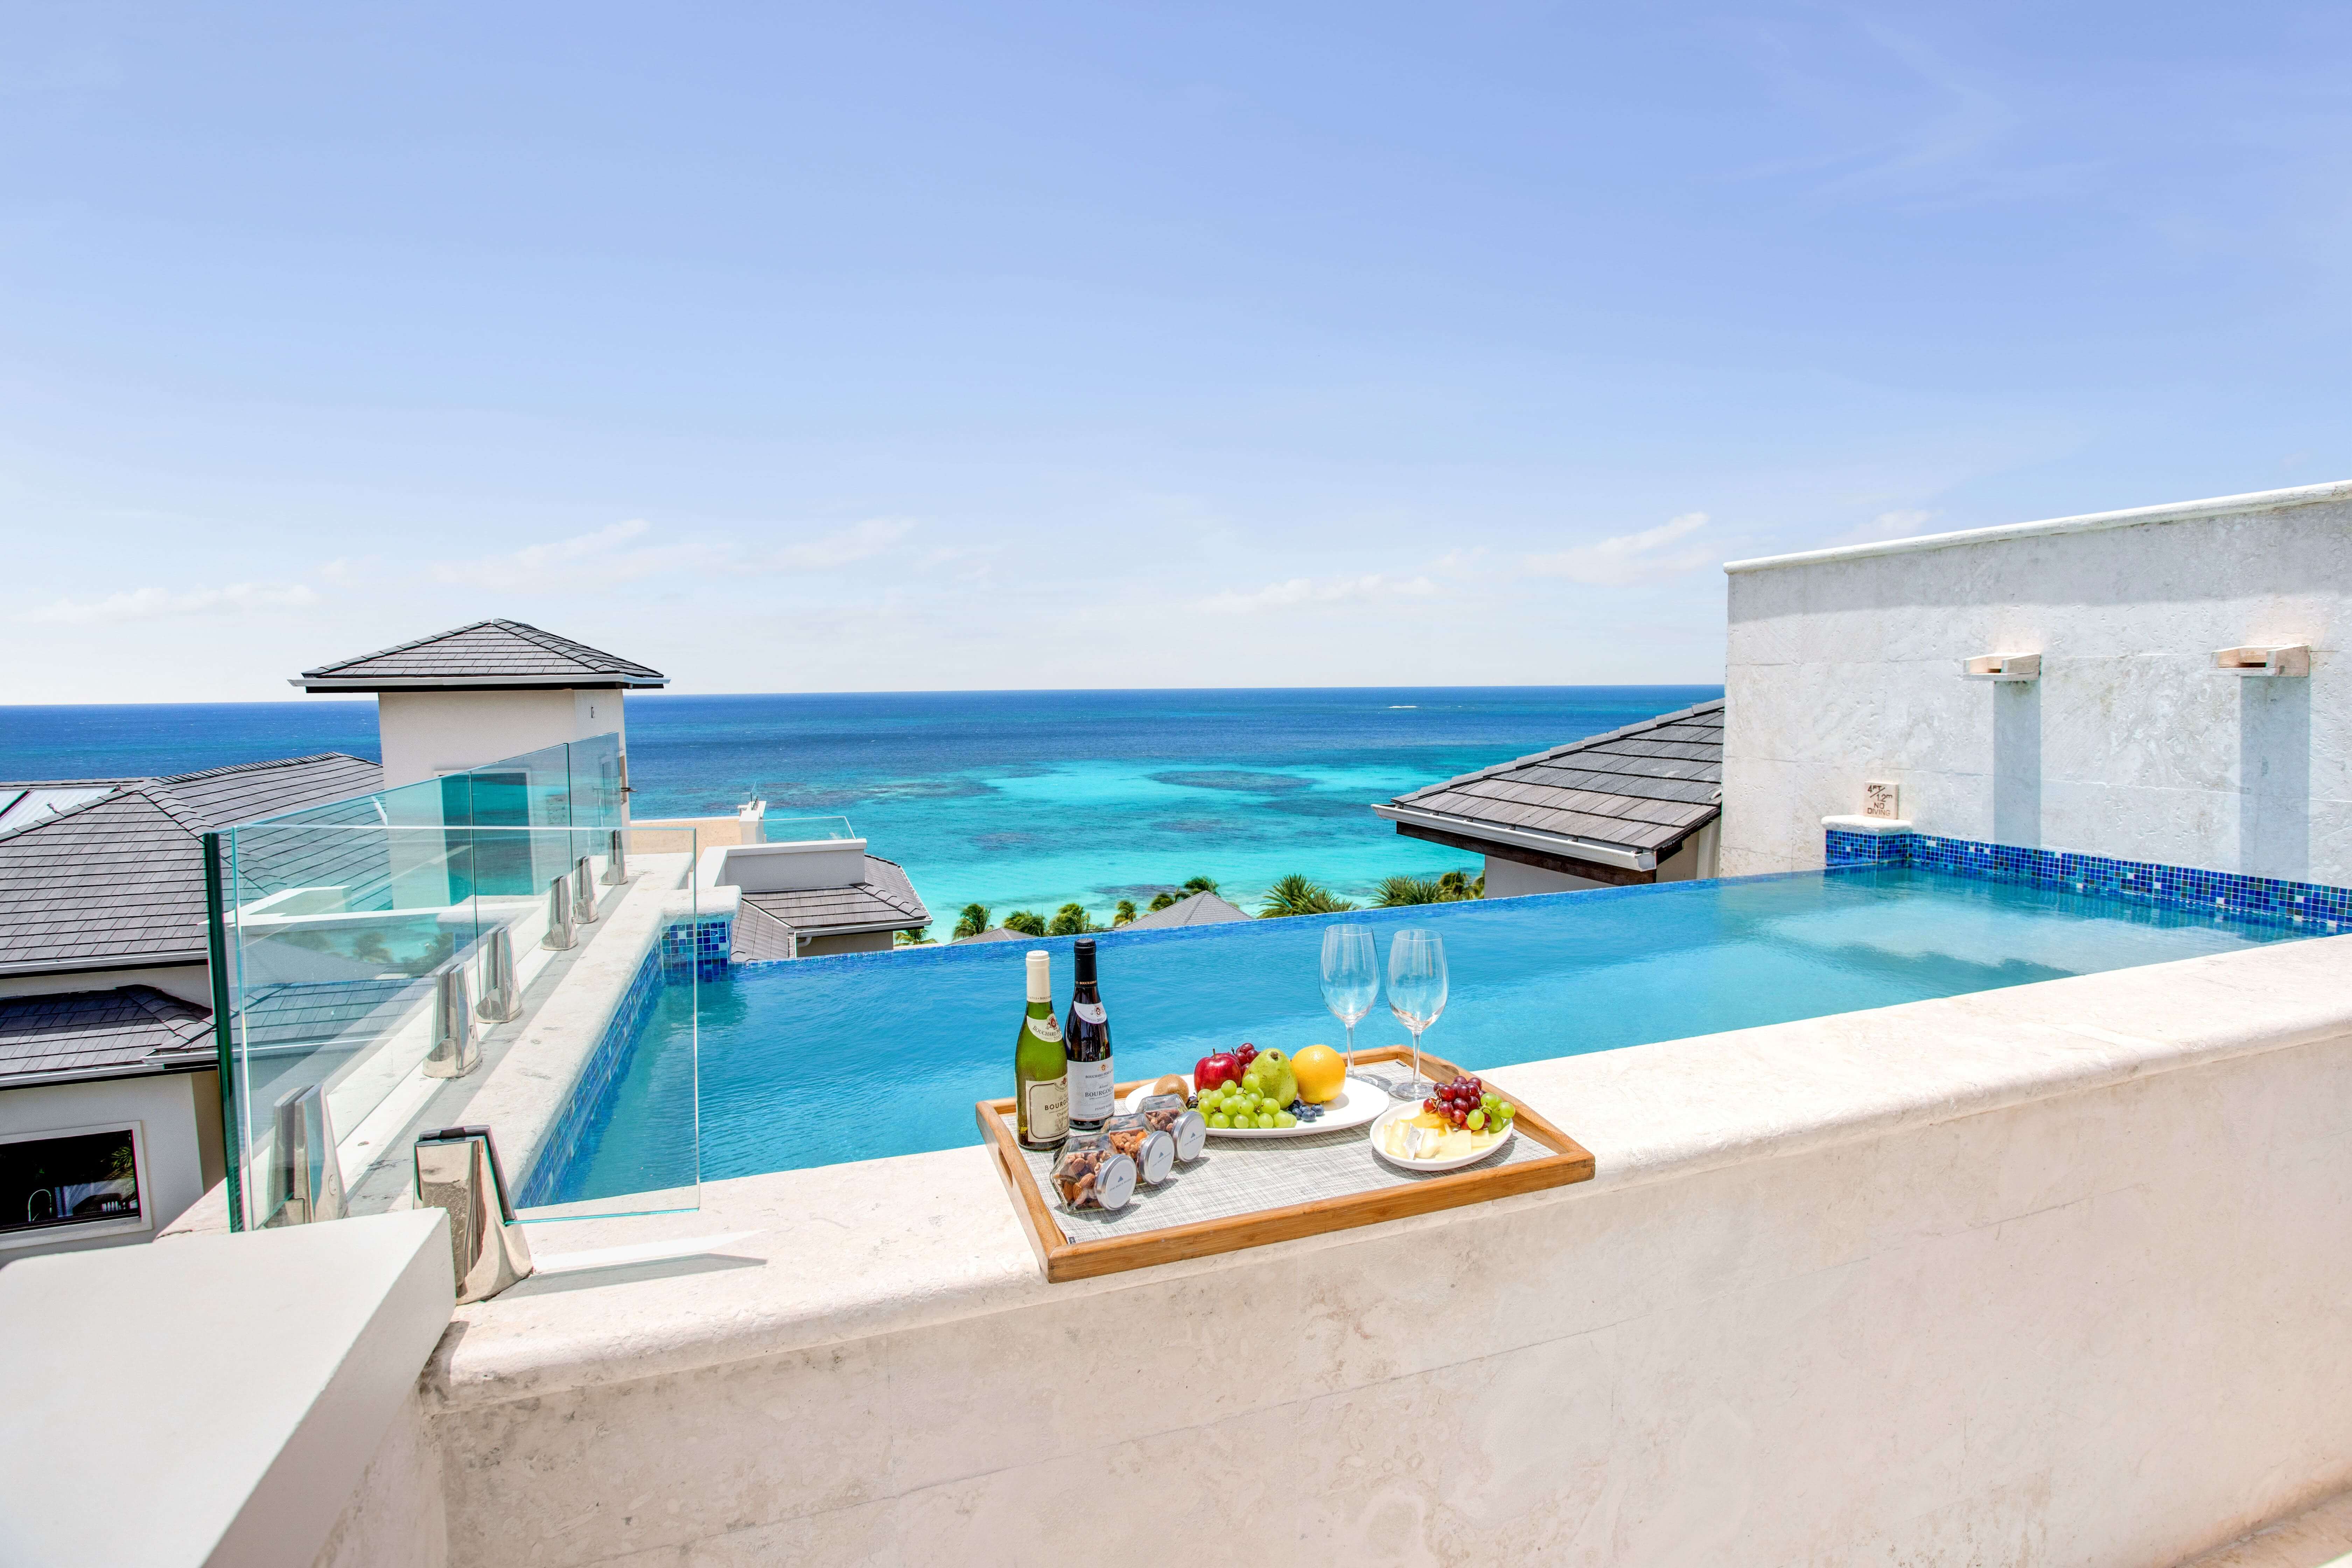 Pool with tray of drinks on edge with view of pool